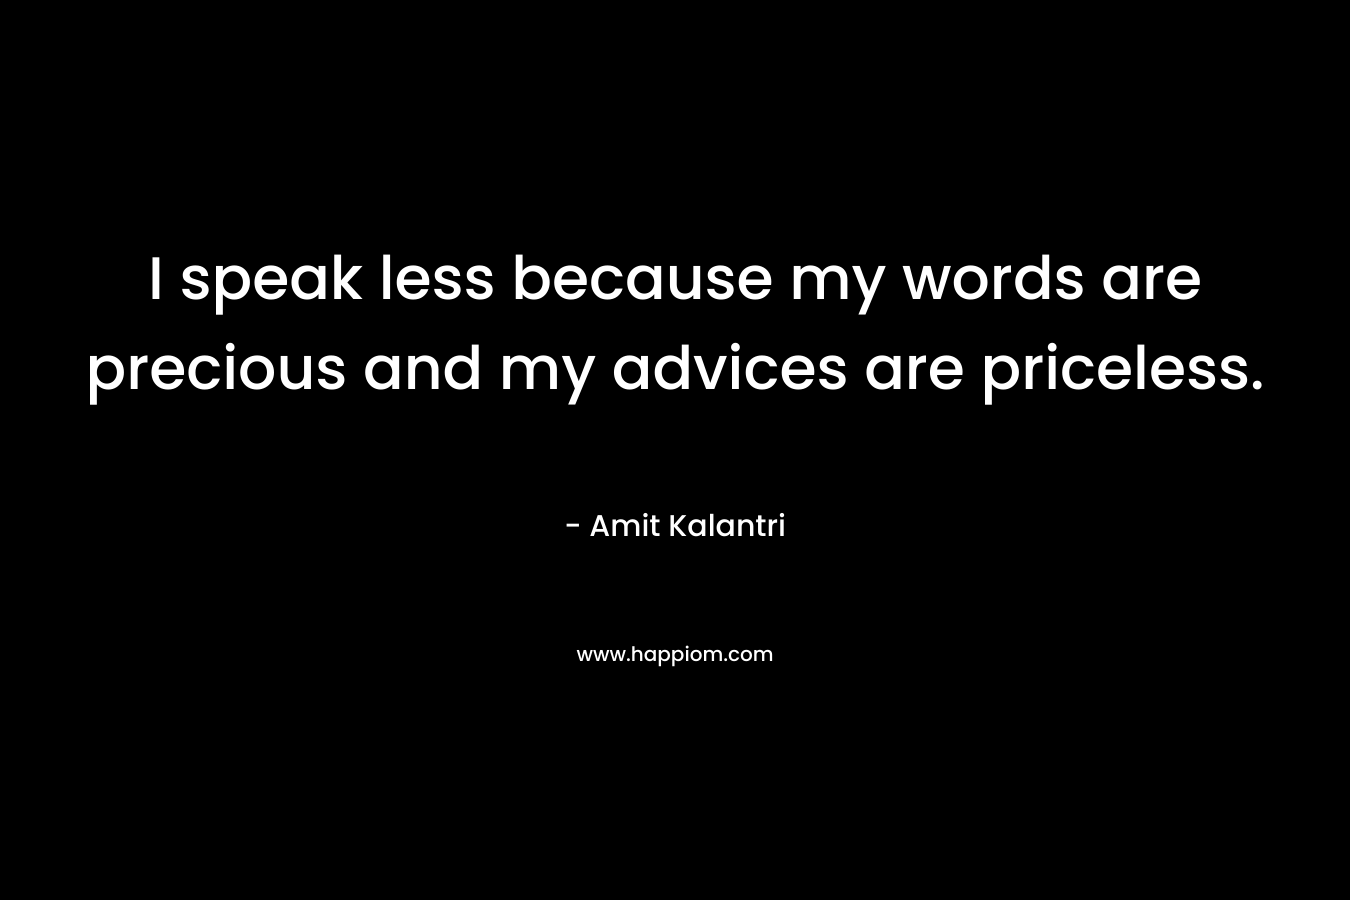 I speak less because my words are precious and my advices are priceless.